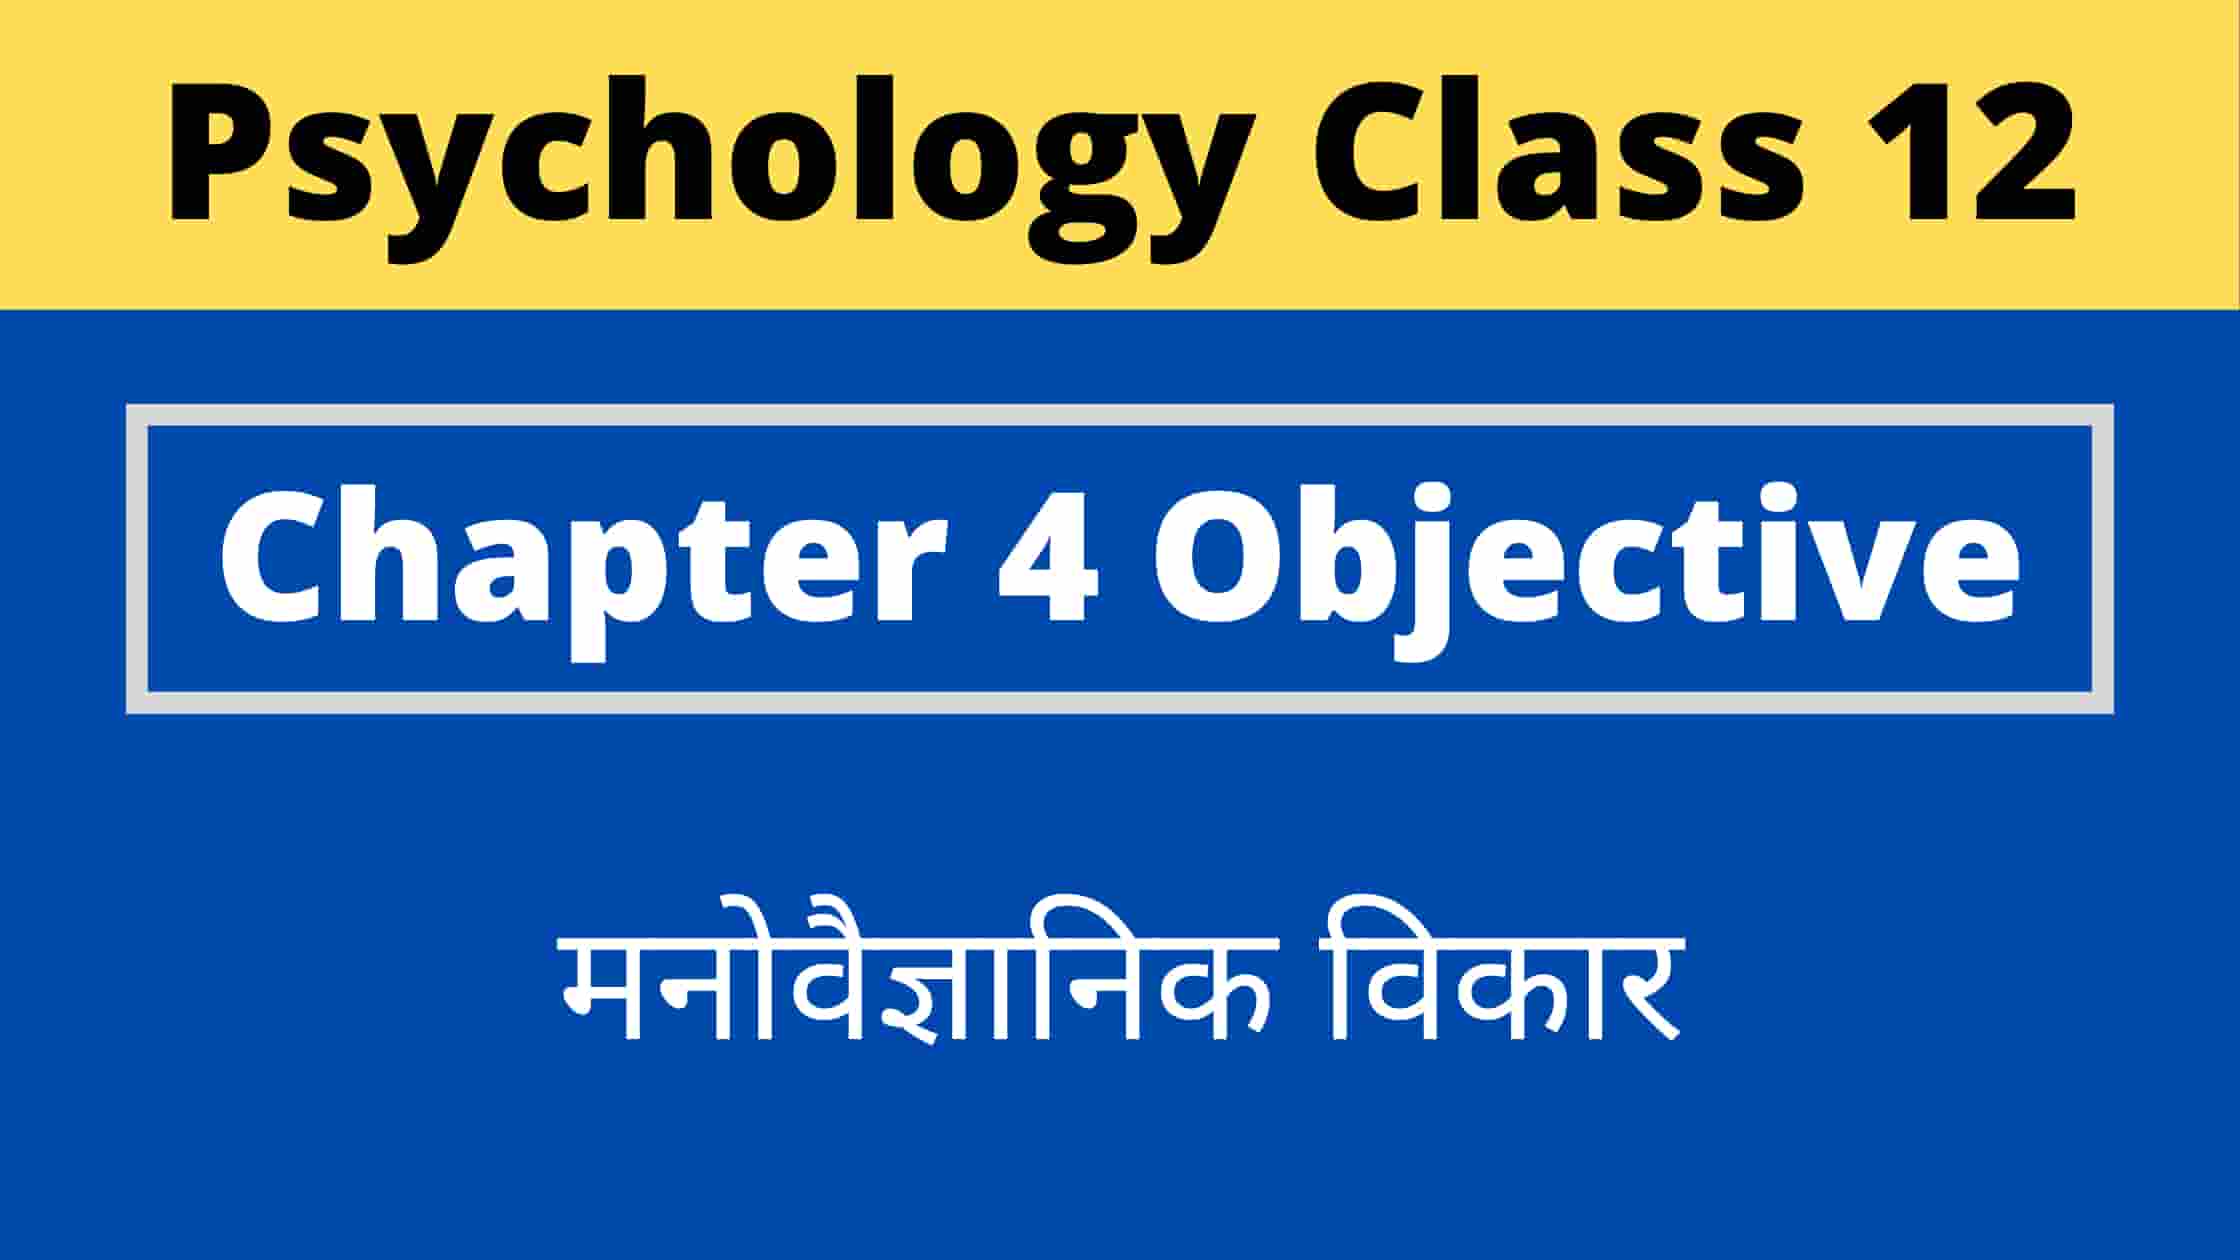 You are currently viewing Psychology Class 12 Chapter 4